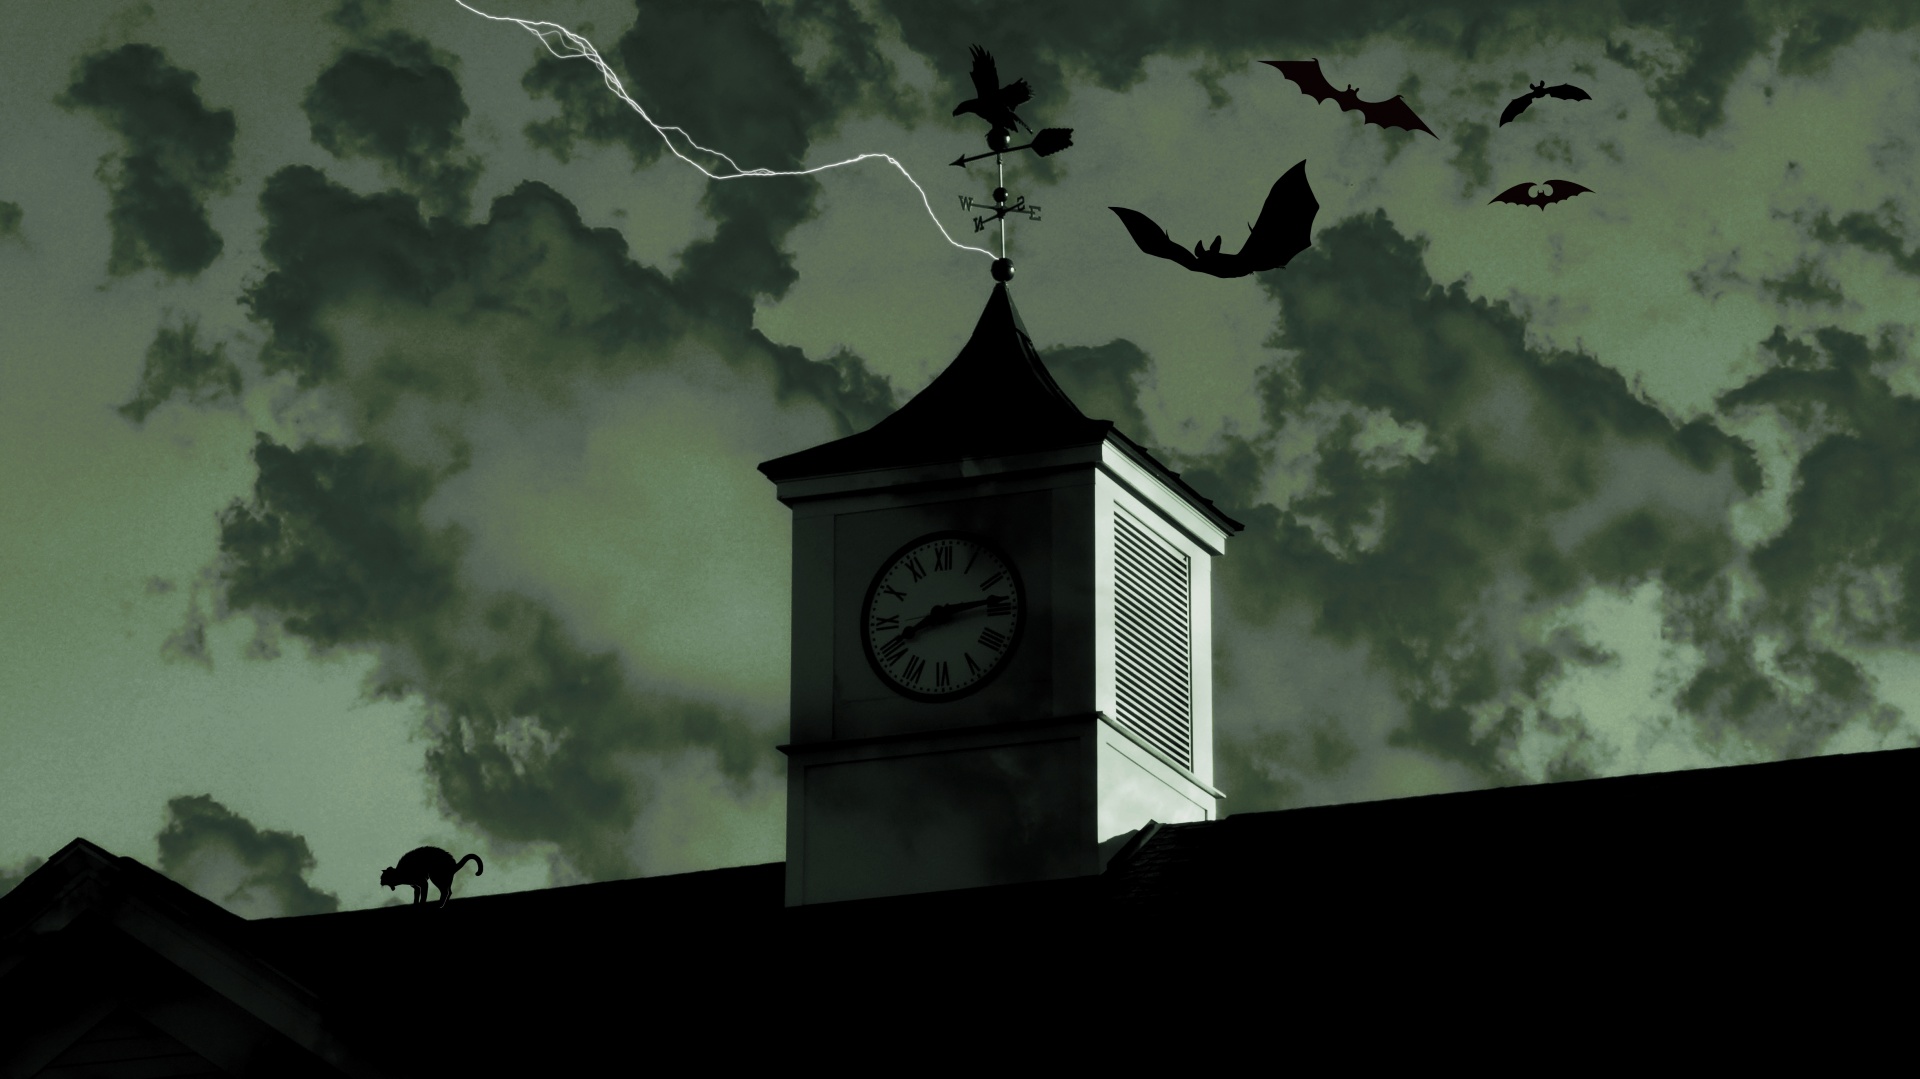 bats and a black cat on haunted roof tower